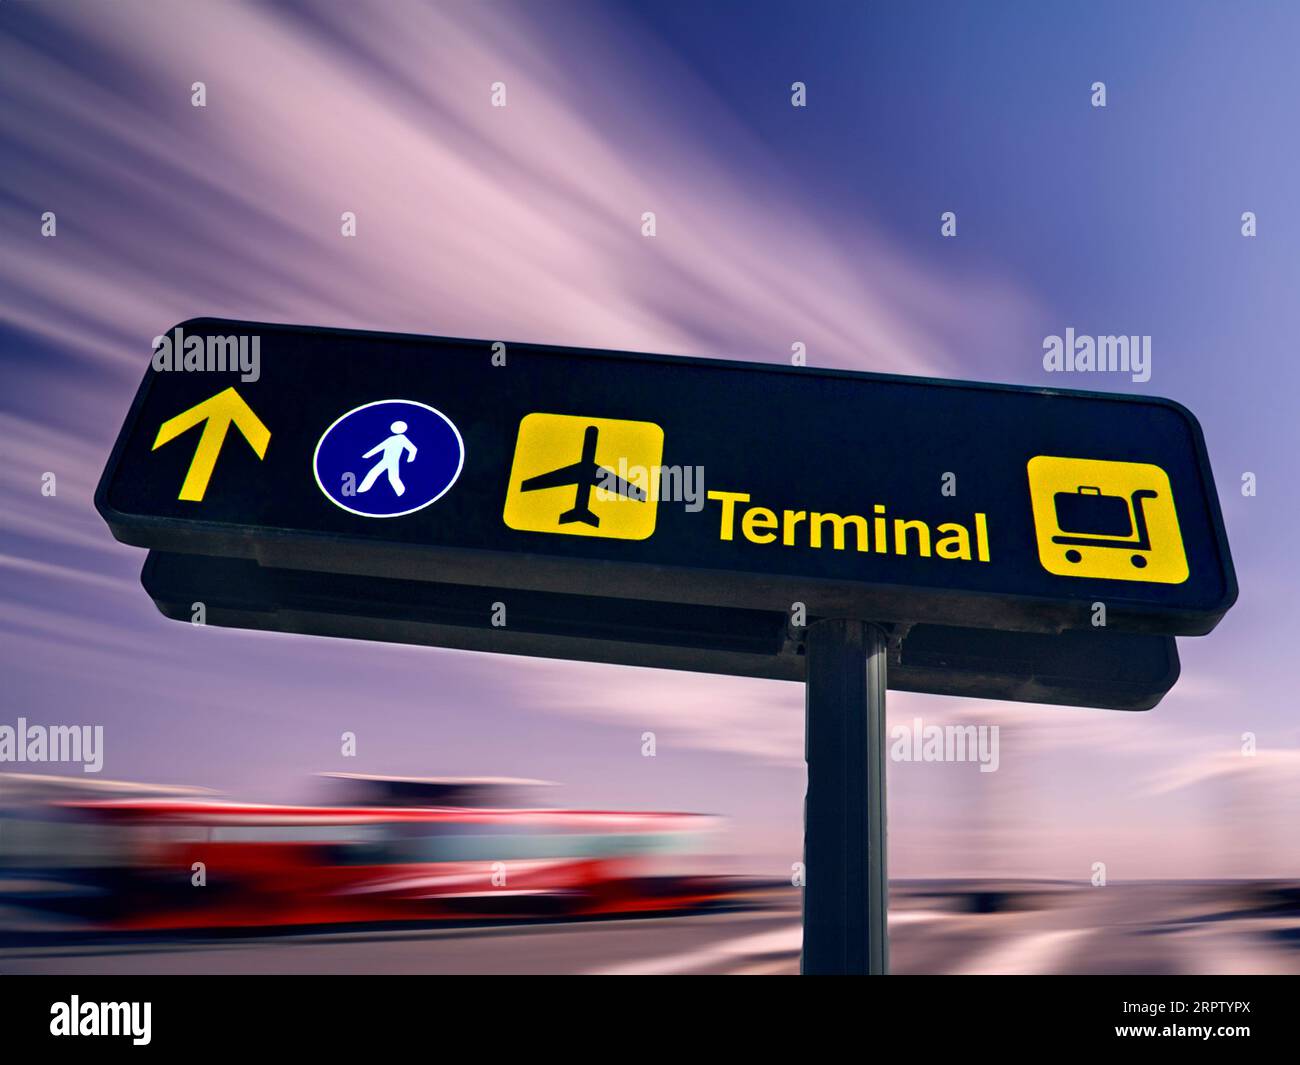 Airport sign signs signage concept blur blurred travel busy speed airline passenger terminal direction information signage panel. Concept Concepts new dawn of passenger air travel signage for departing vacation holiday airline passengers, directing to terminals, airlines, baggage drop, walkway check-in, speed blur background. Airport exterior signage foot passenger information sign Stock Photo